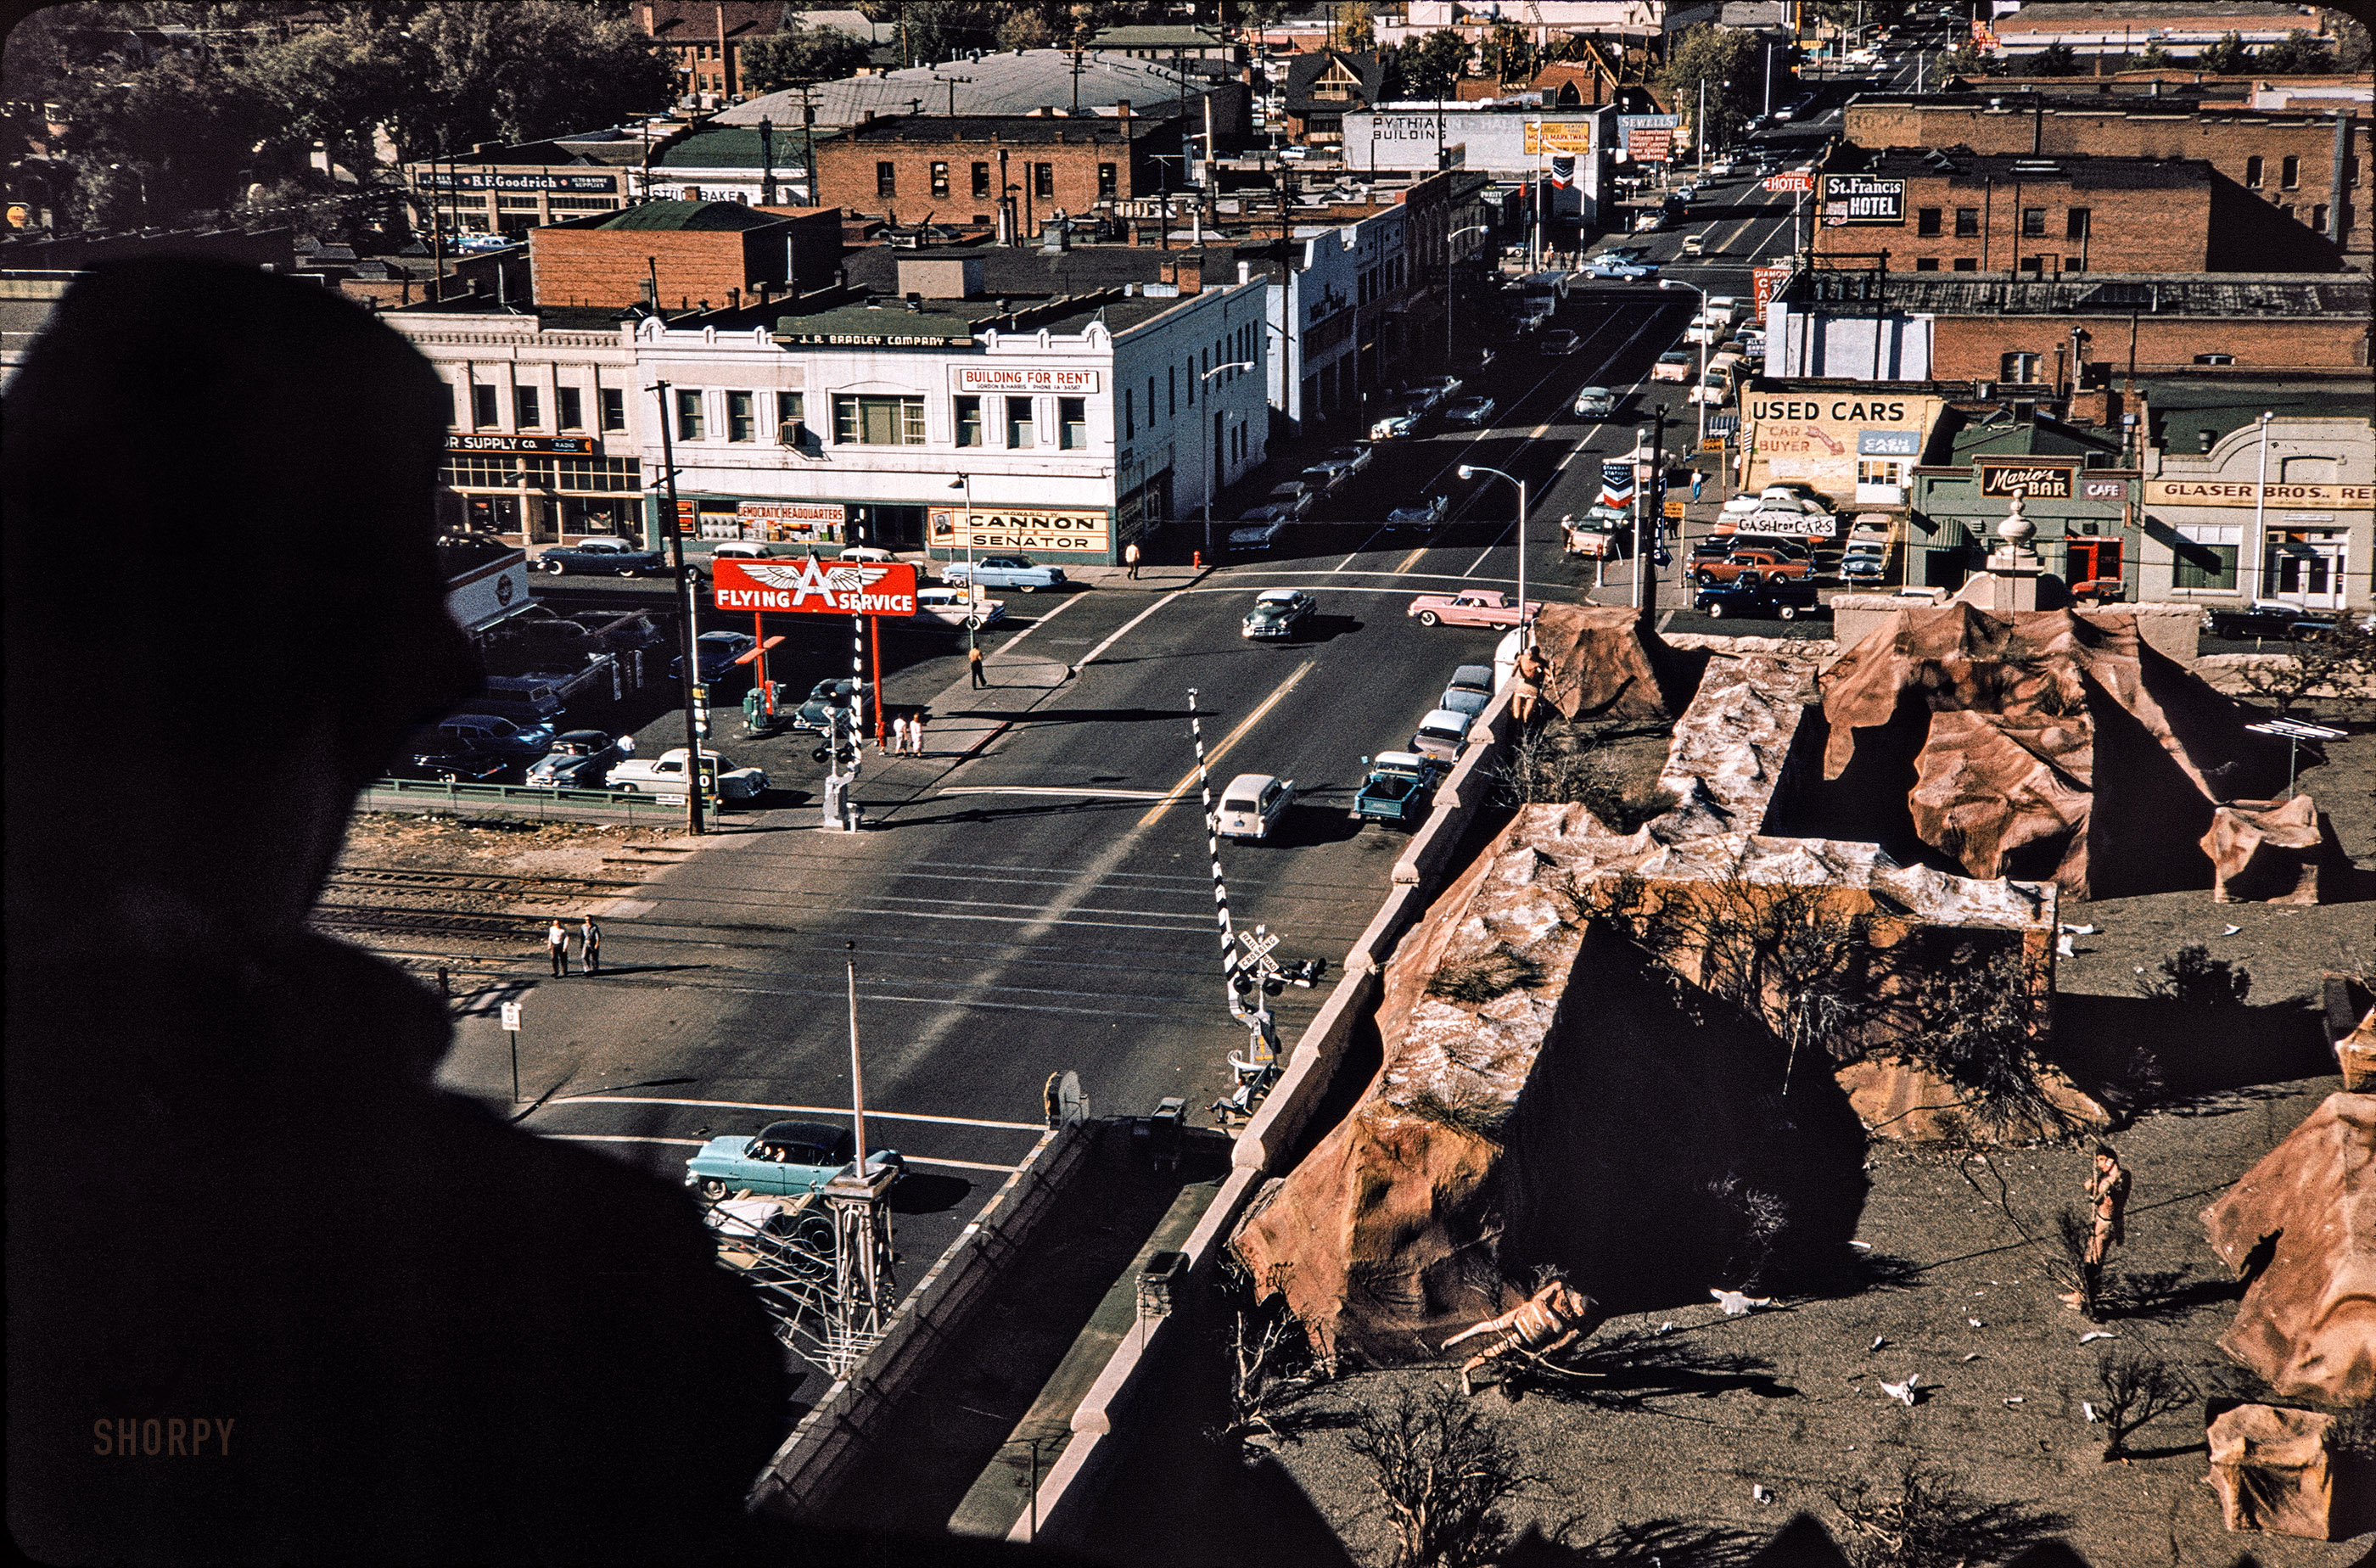 The latest dispatch from Don Cox is this Kodachrome dated October 1958. Judging by the mayhem on the roof below I'd say we're somewhere in the Wild, Wild West, where the men are men and the Thunderbirds are pink. (Yes, it's Reno. Also: Cash for Cars!) View full size.